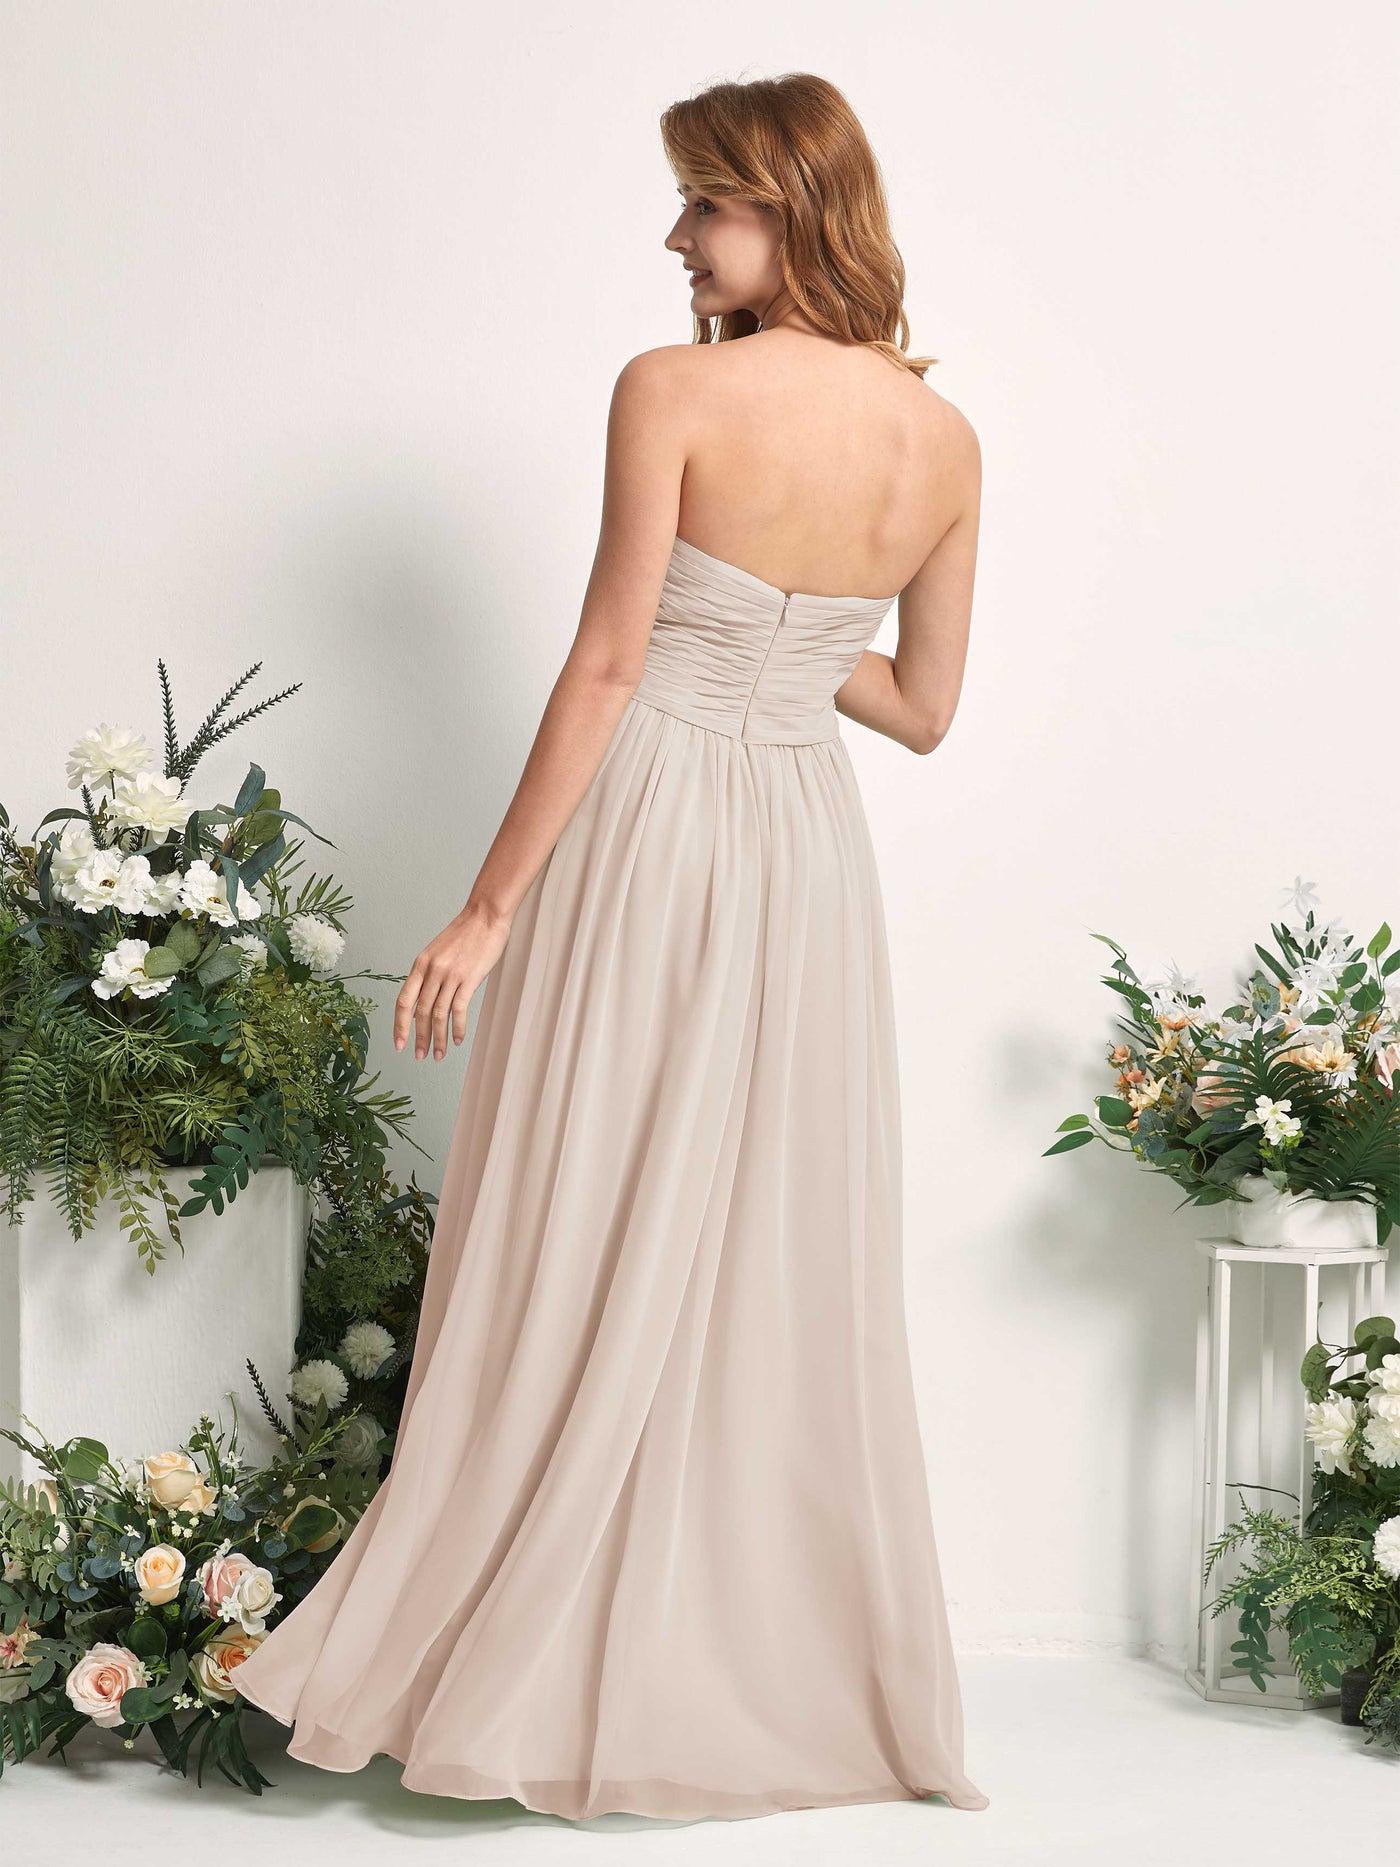 Bridesmaid Dress A-line Chiffon Sweetheart Full Length Sleeveless Wedding Party Dress - Champagne (81226916)#color_champagne